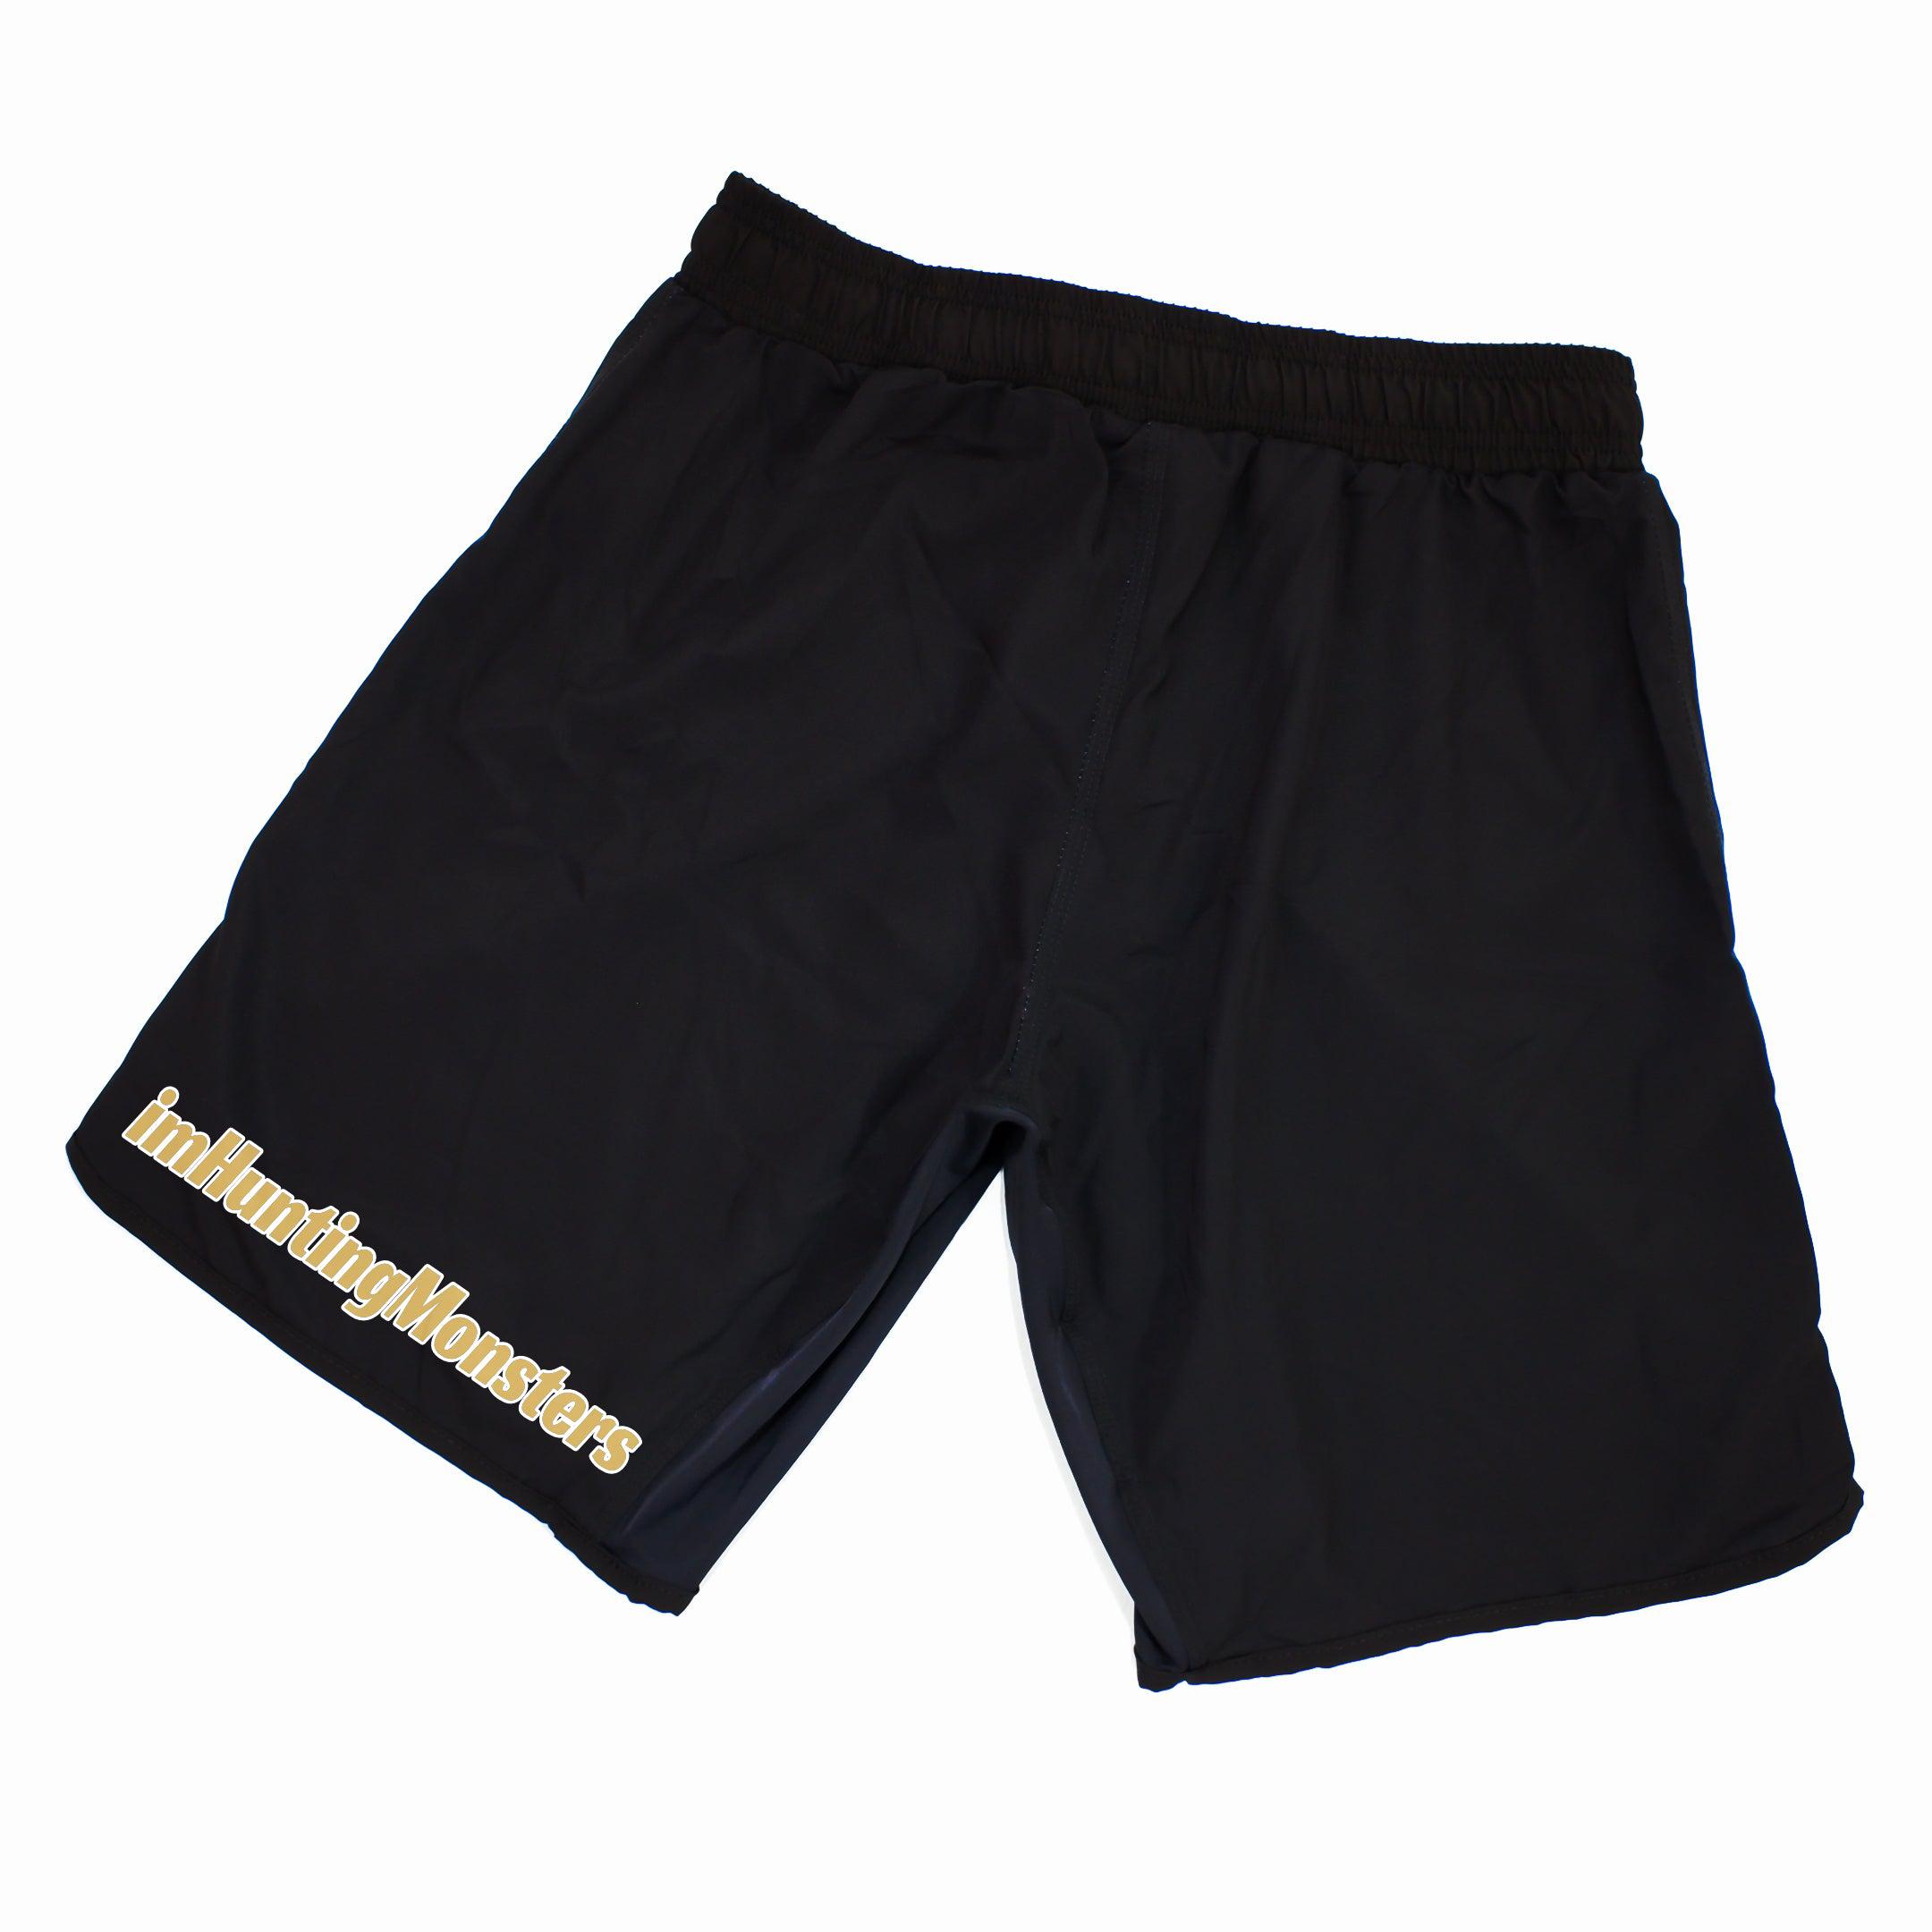 imHuntingMonsters Pirate Grappling Shorts (Black)